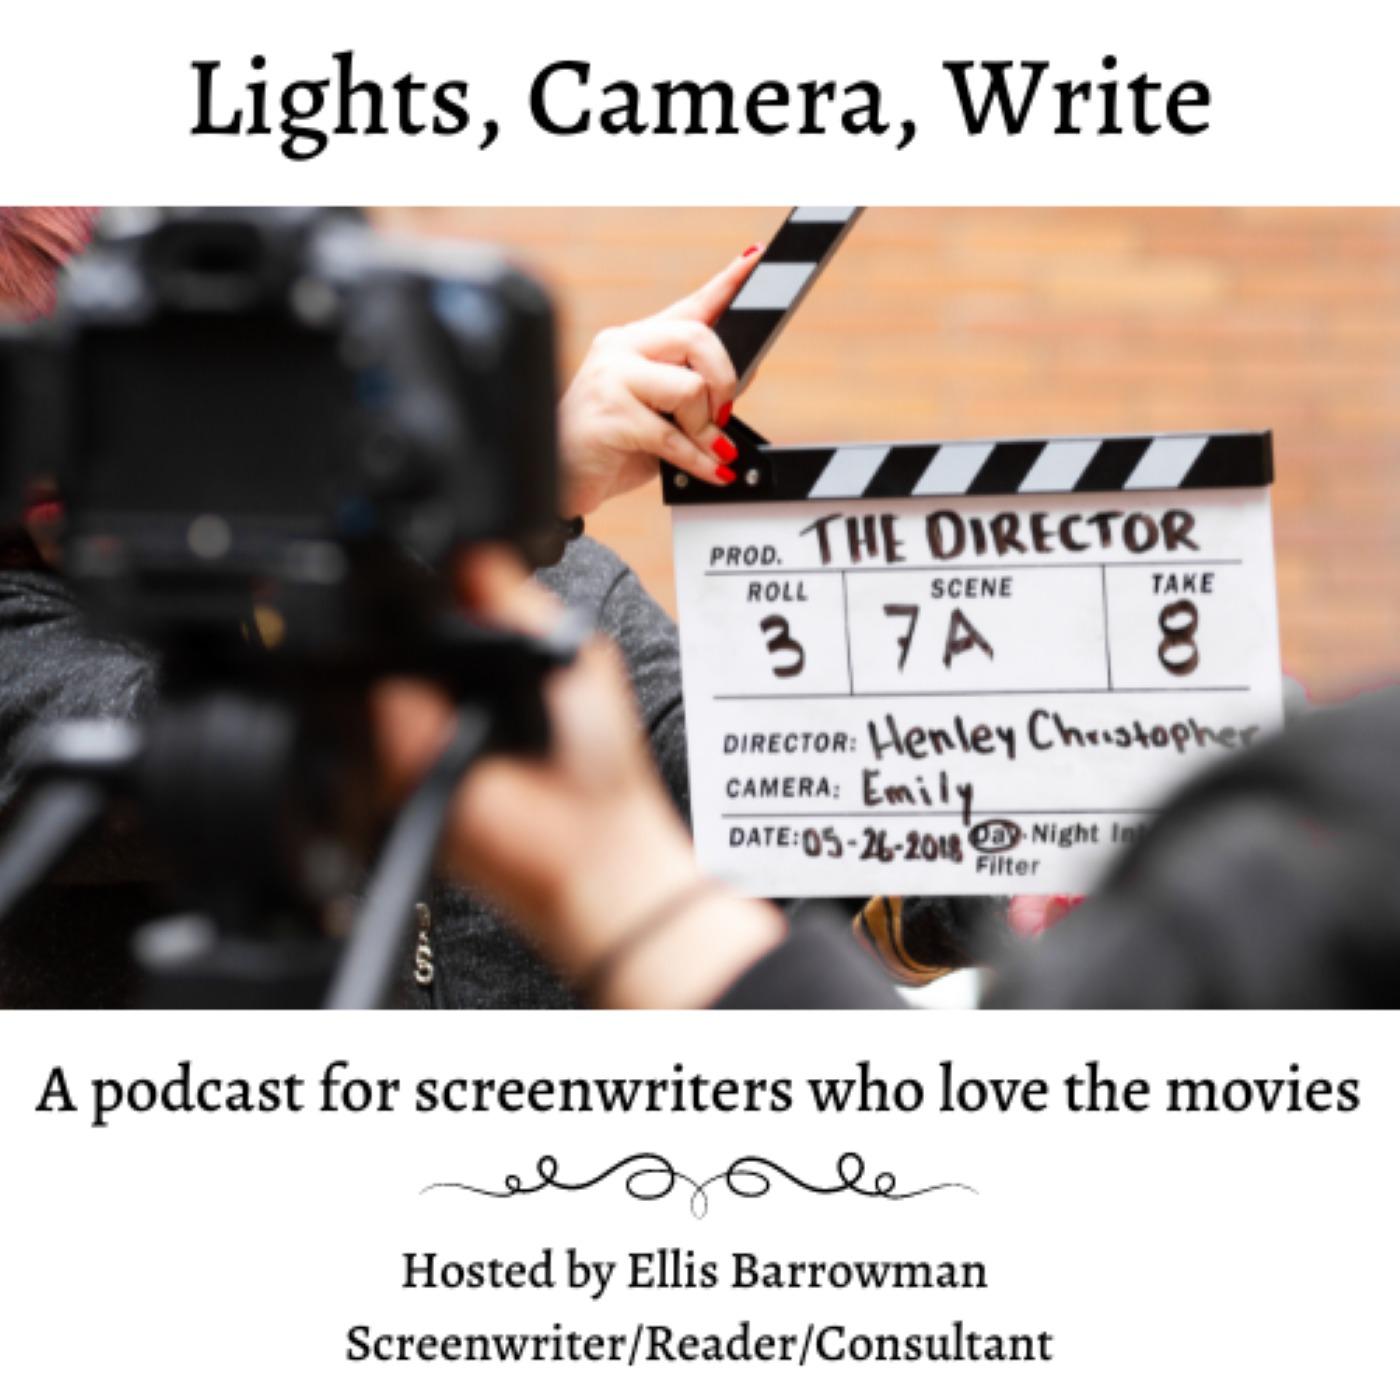 Lights, Camera, Write; A Podcast for Screenwriters Looking at All Aspects of Screenwriting